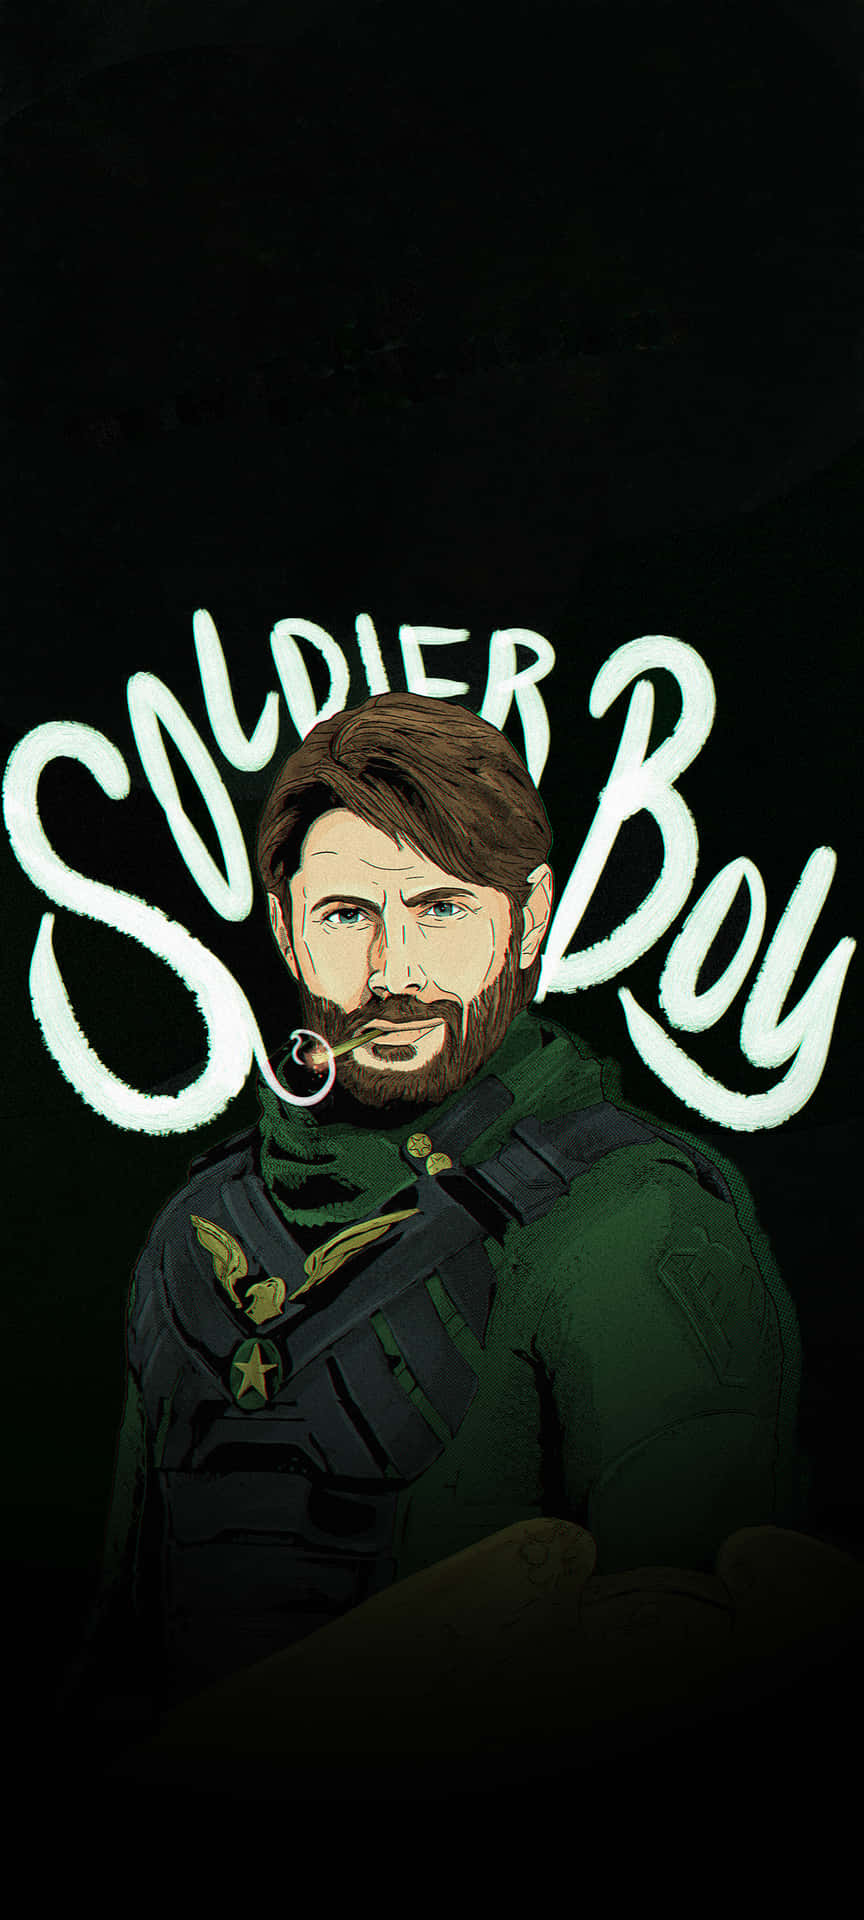 These Soldier Boys Art Wallpaper